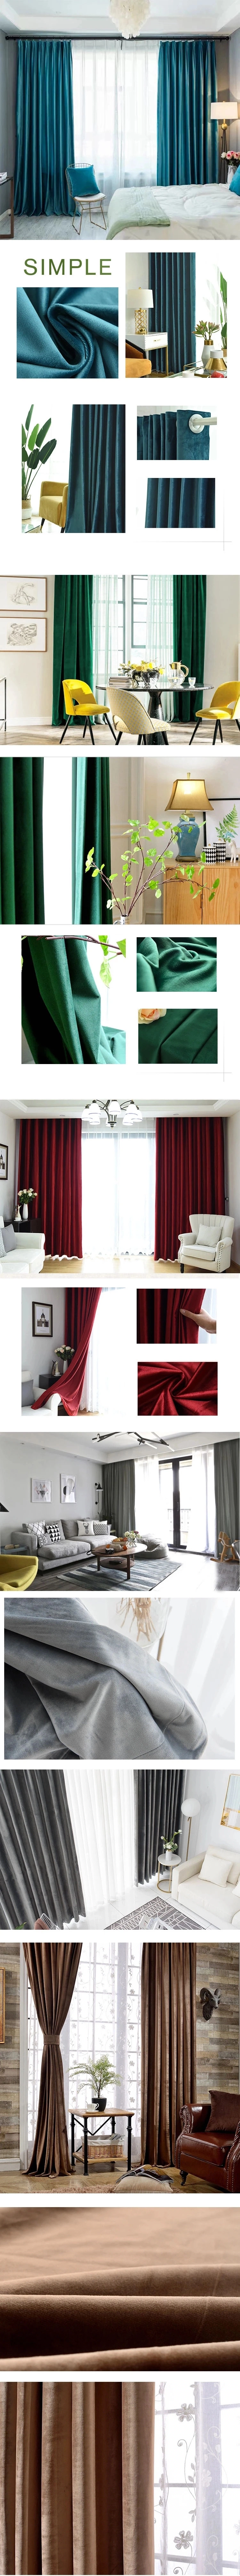 New Style High Shading Ready Made Custom Window Curtains, Blackout Window Curtains for The Living Room